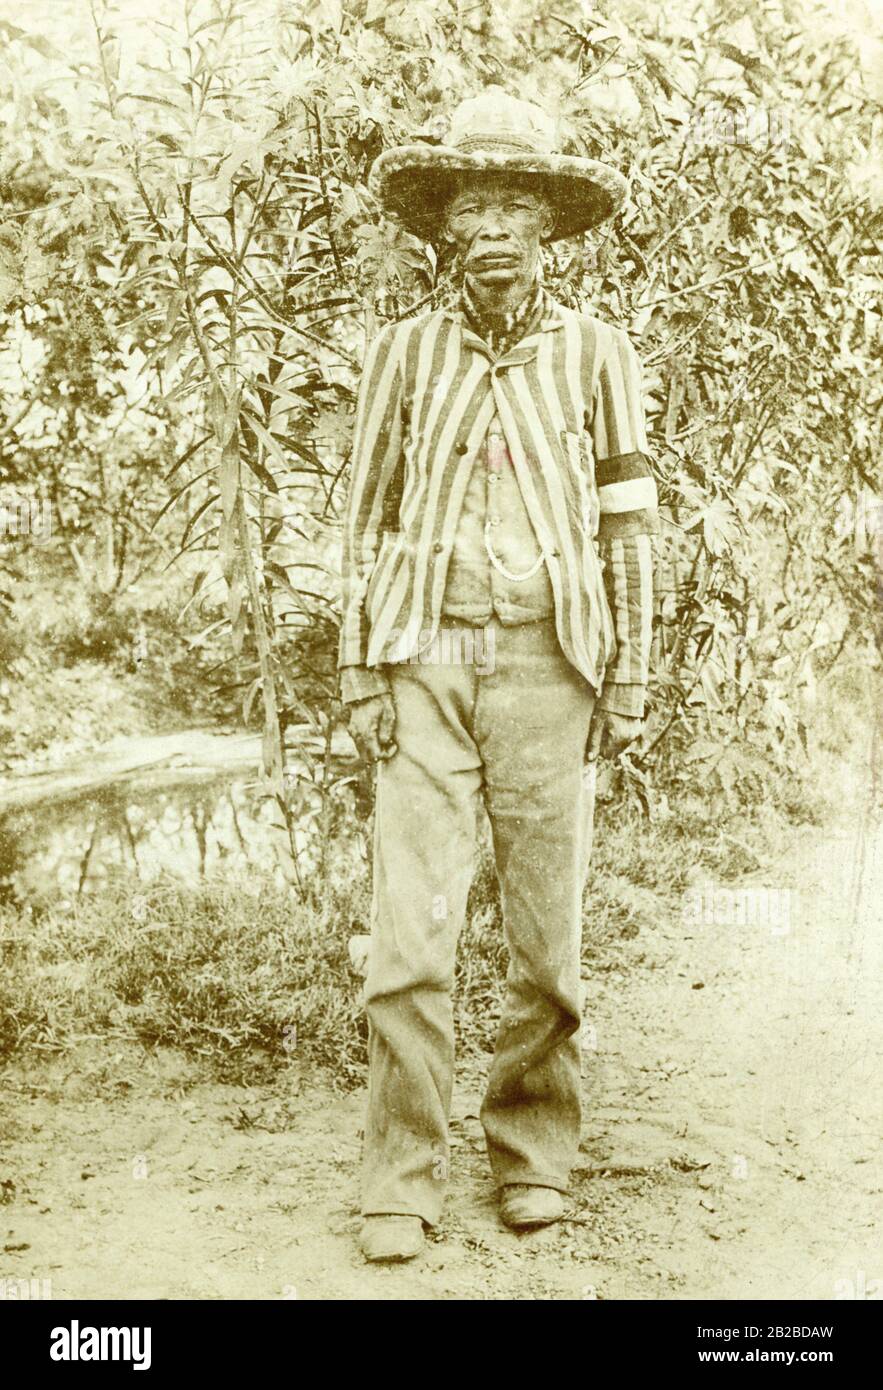 Between 1904 and 1908, the native population rose against German supremacy in German South-West Africa. The picture shows the leader of the movement Simon Copper. The so-called Herero uprising ended with an extermination campaign of the German colonial troops. Stock Photo